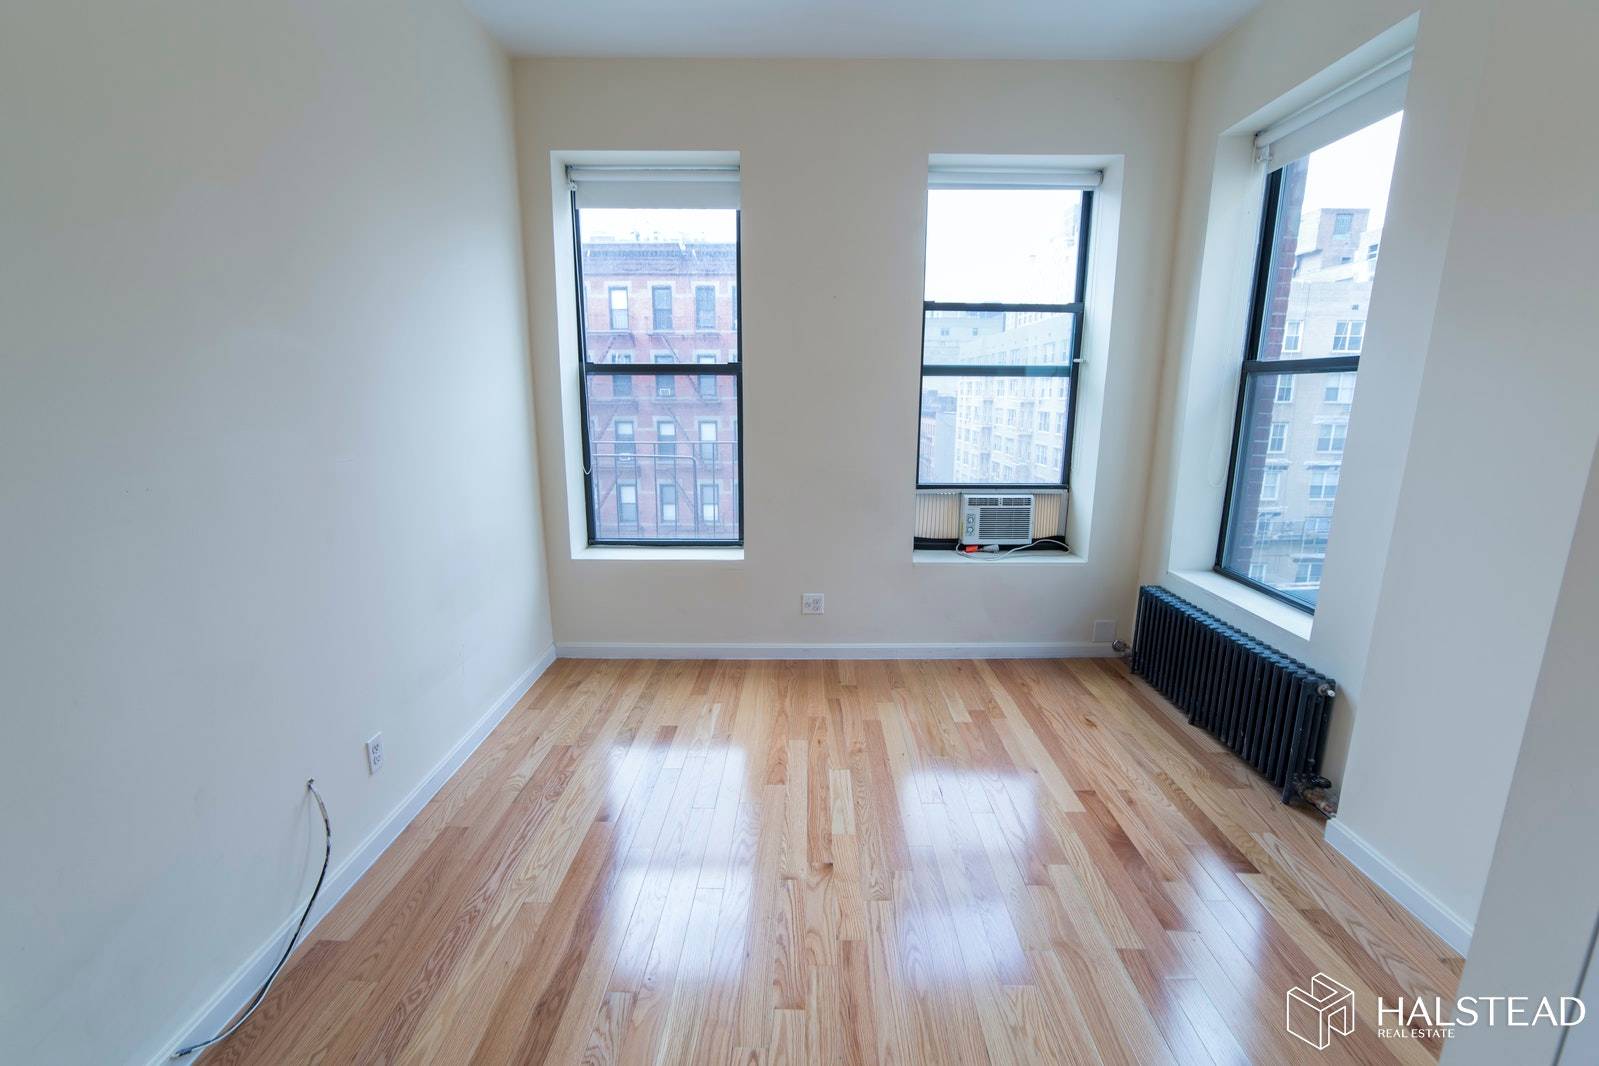 One Month Free Available for ASAP occupancy is this recently gut renovated three bedroom corner apartment on the corner of 56th and 9th Ave.